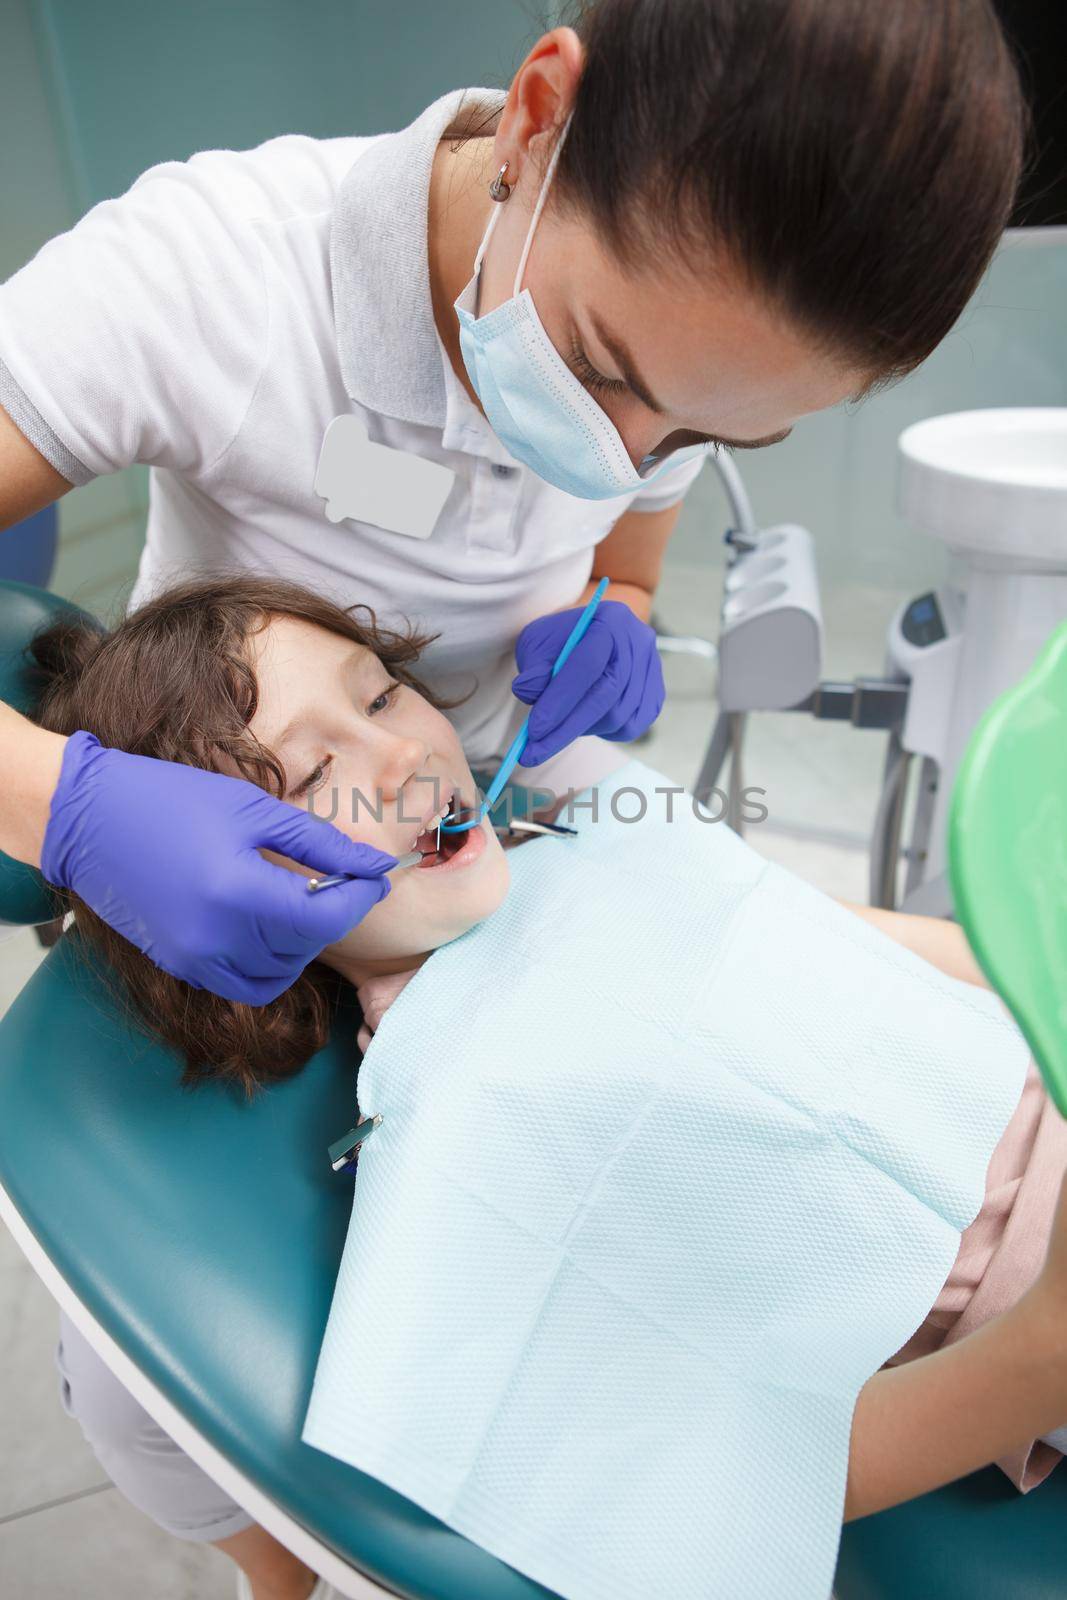 Vertical shot of a professional dentist examining teeth of young boy